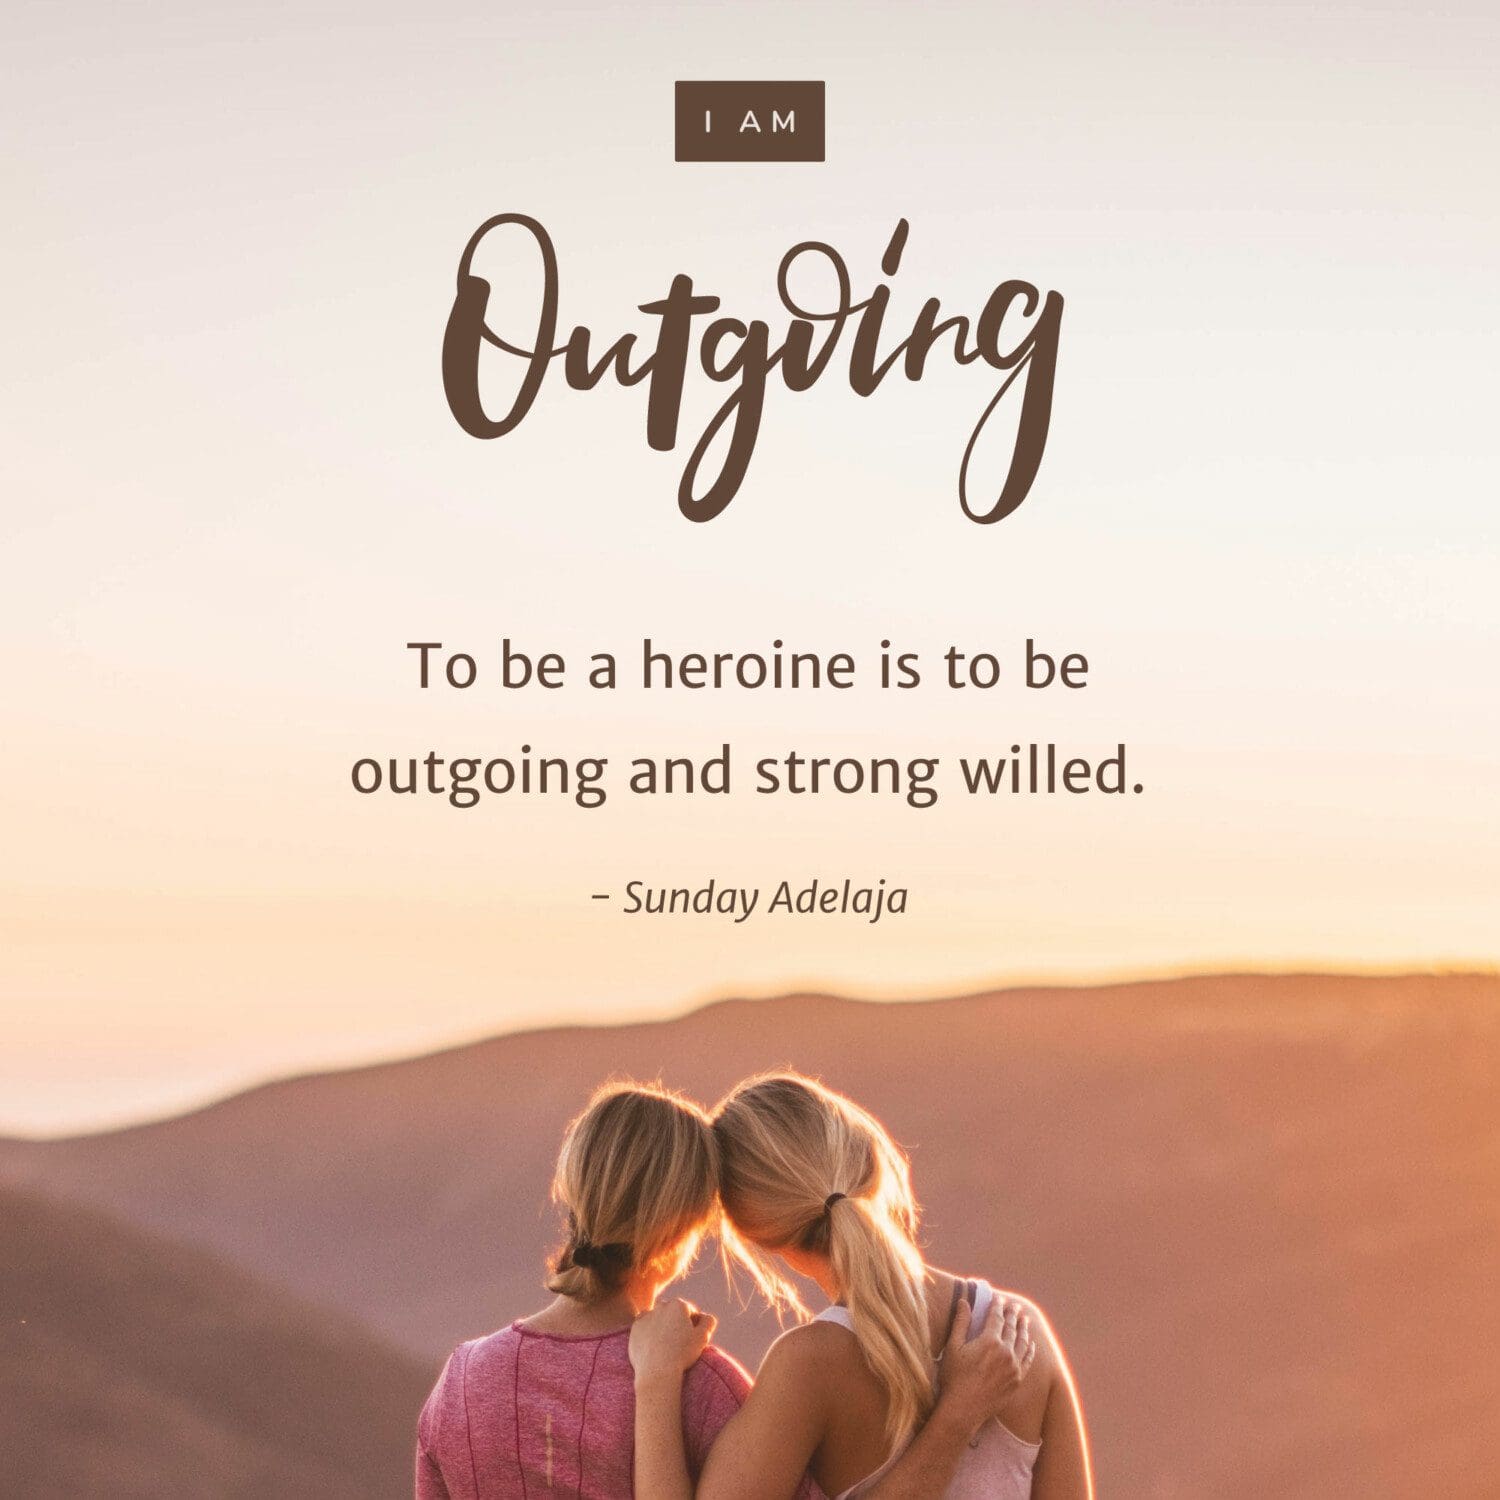 To be a heroine is to be outgoing and strong willed. – Sunday Adelaja